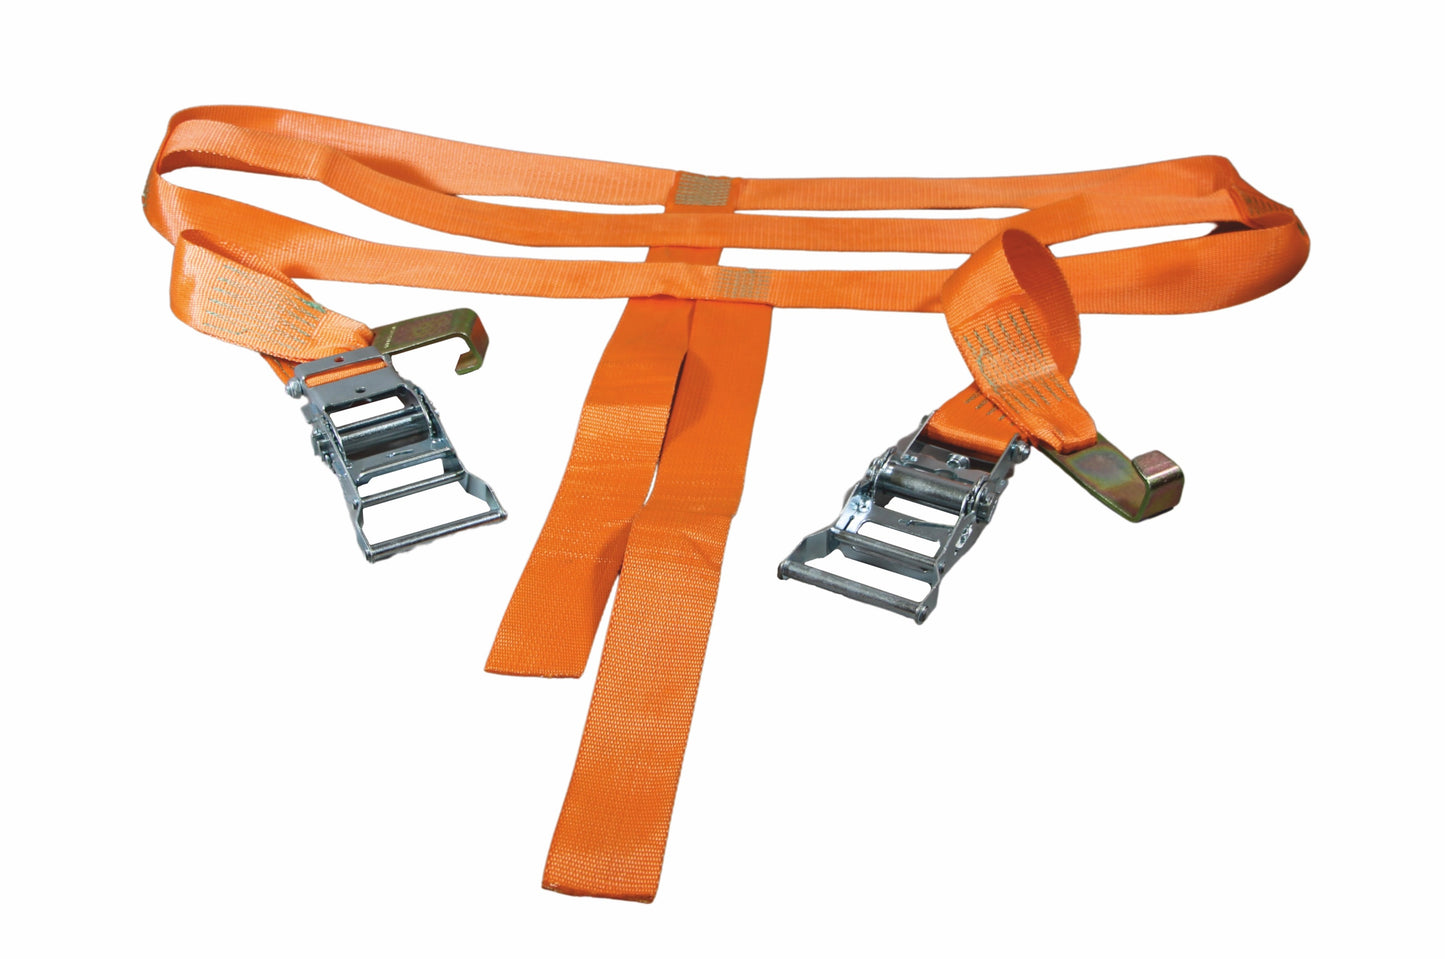 Multi-use Single Drum Securement with Ratchet/ Hook